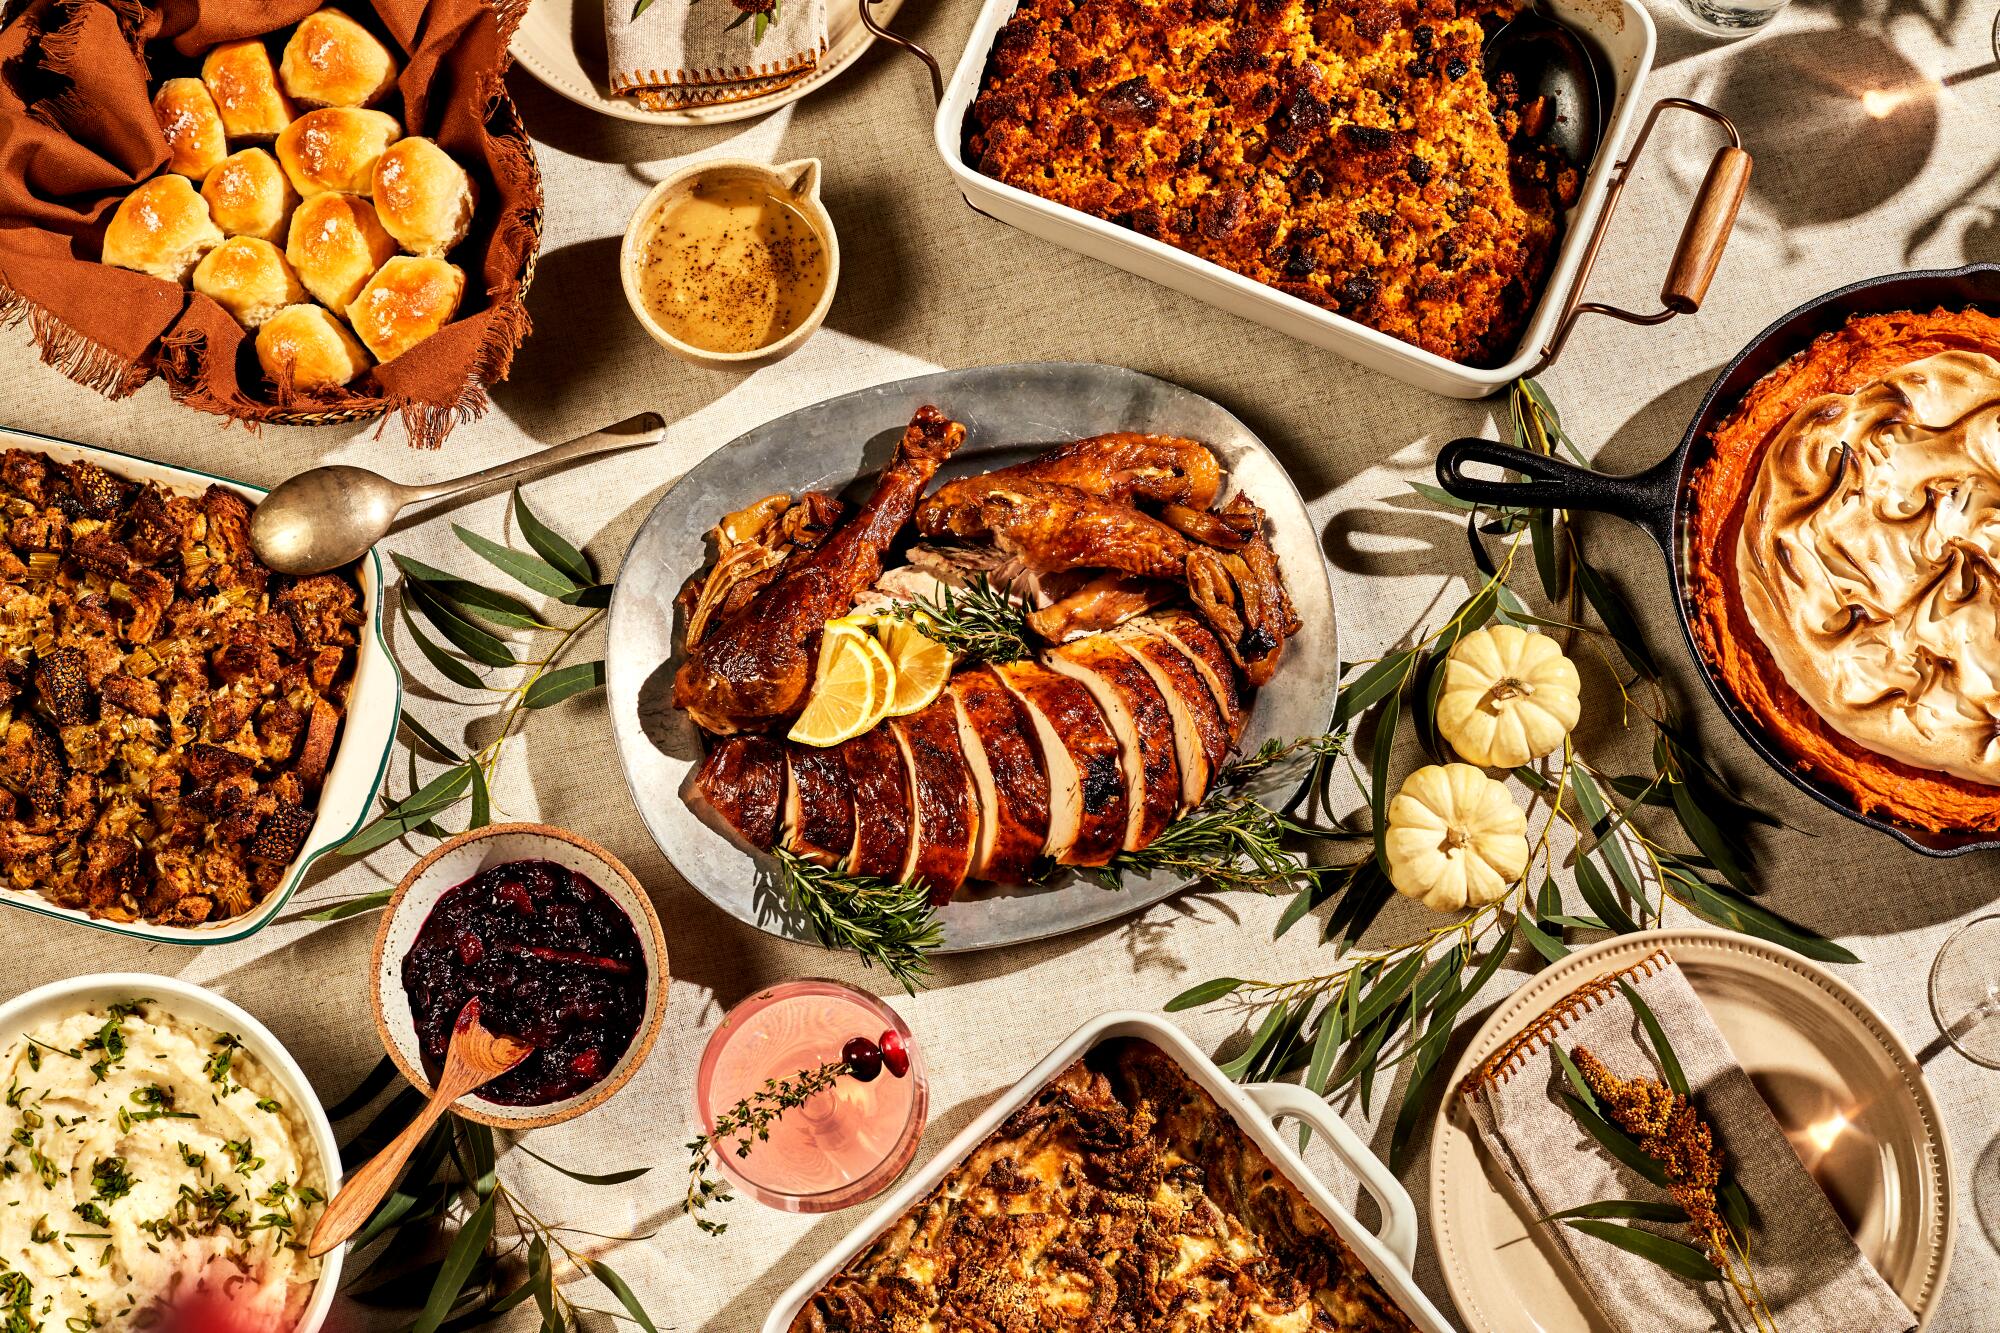 A Thanksgiving spread prepared in the L.A. Times test kitchen. (Katrina Frederick / For The Times)